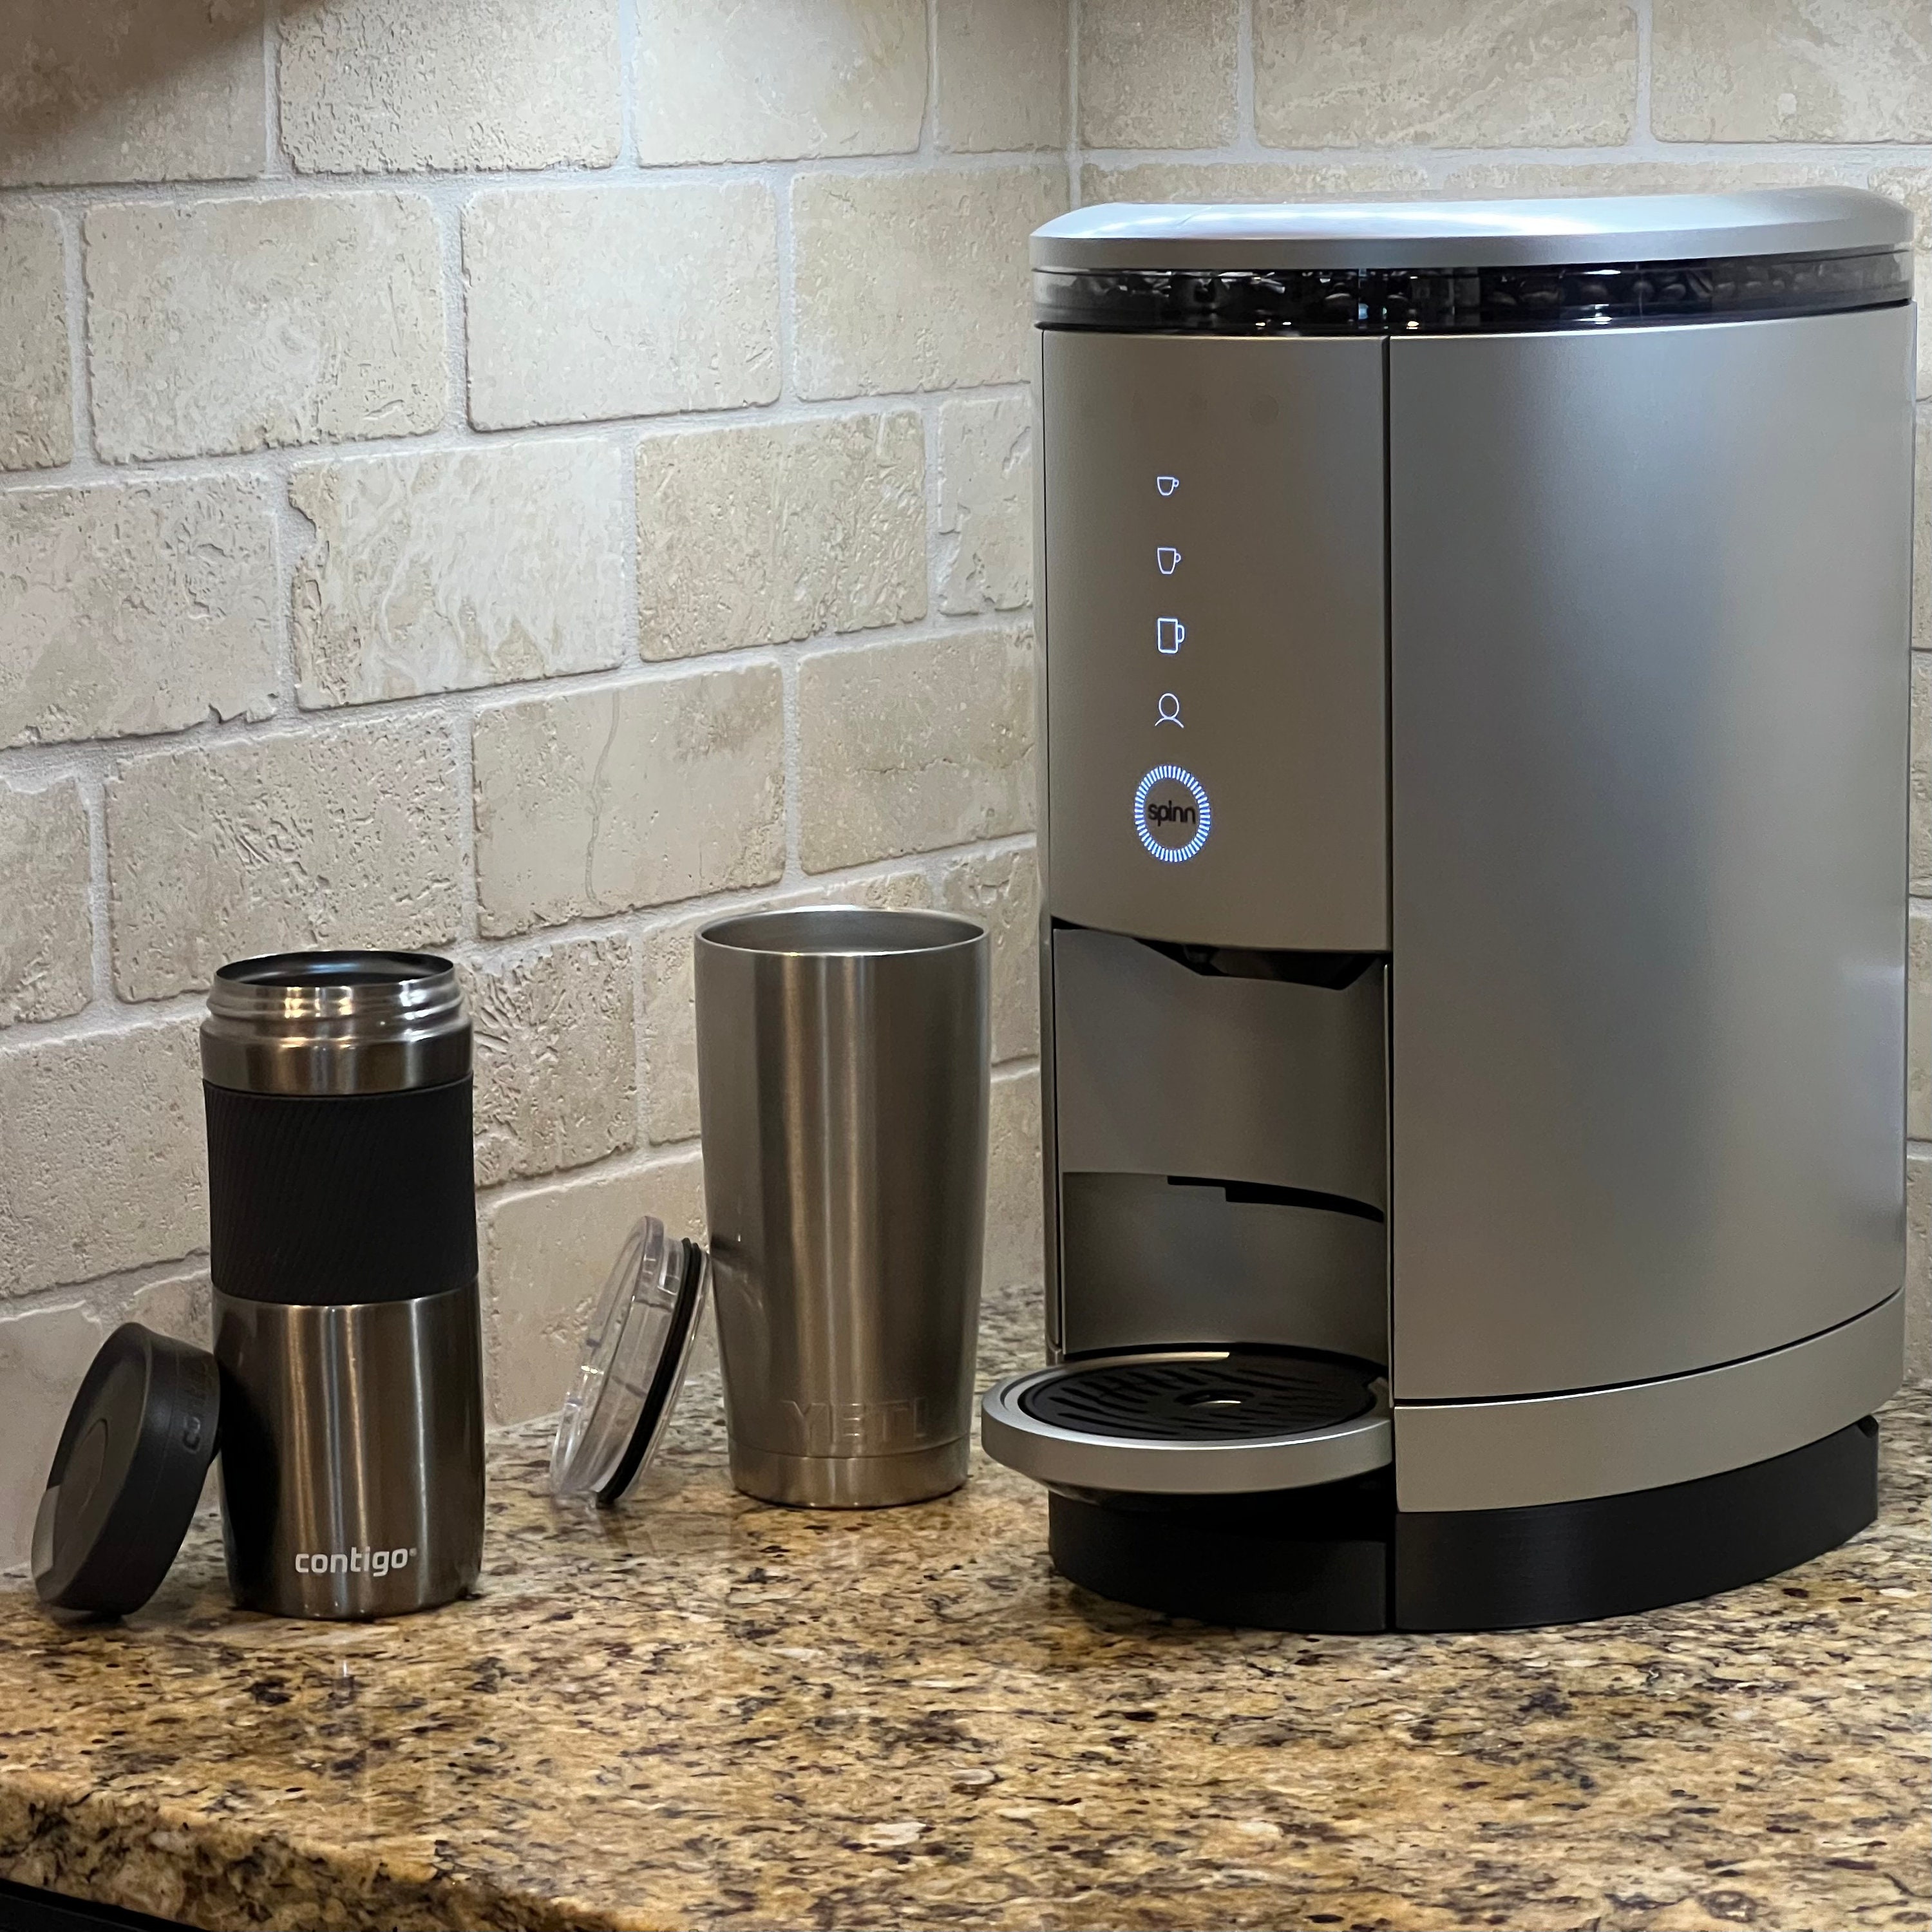 Review: Spinn Coffee Maker Is Worth the Price